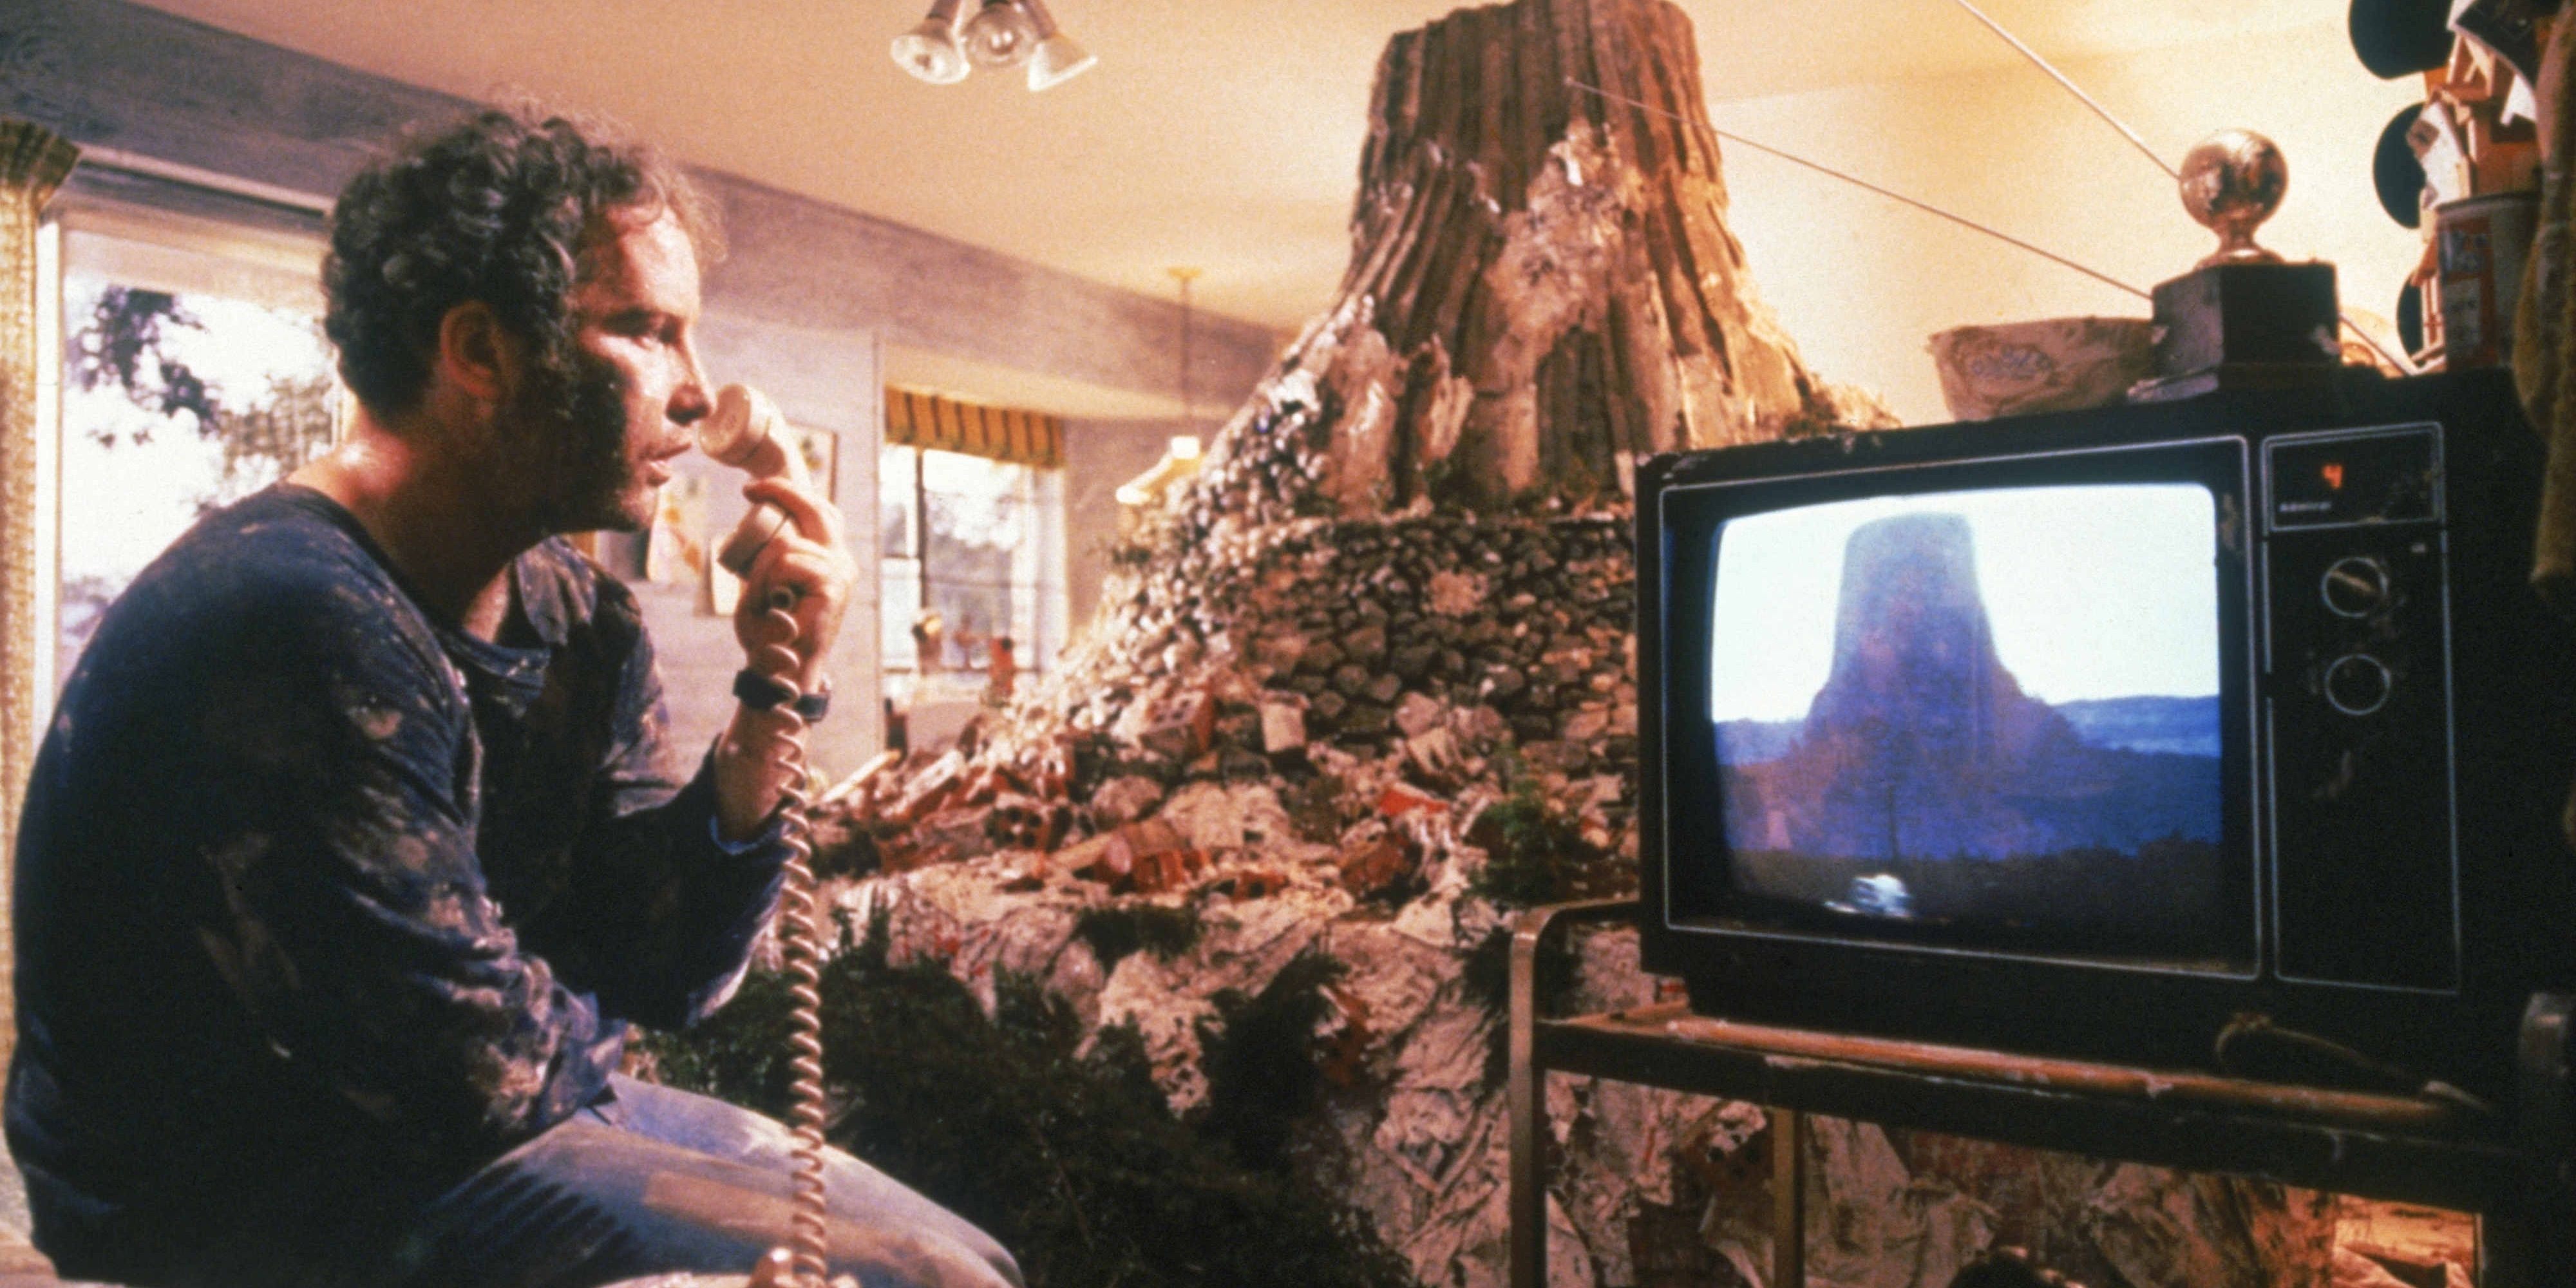 Roy watching his TV in Close Encounters of the Third Kind